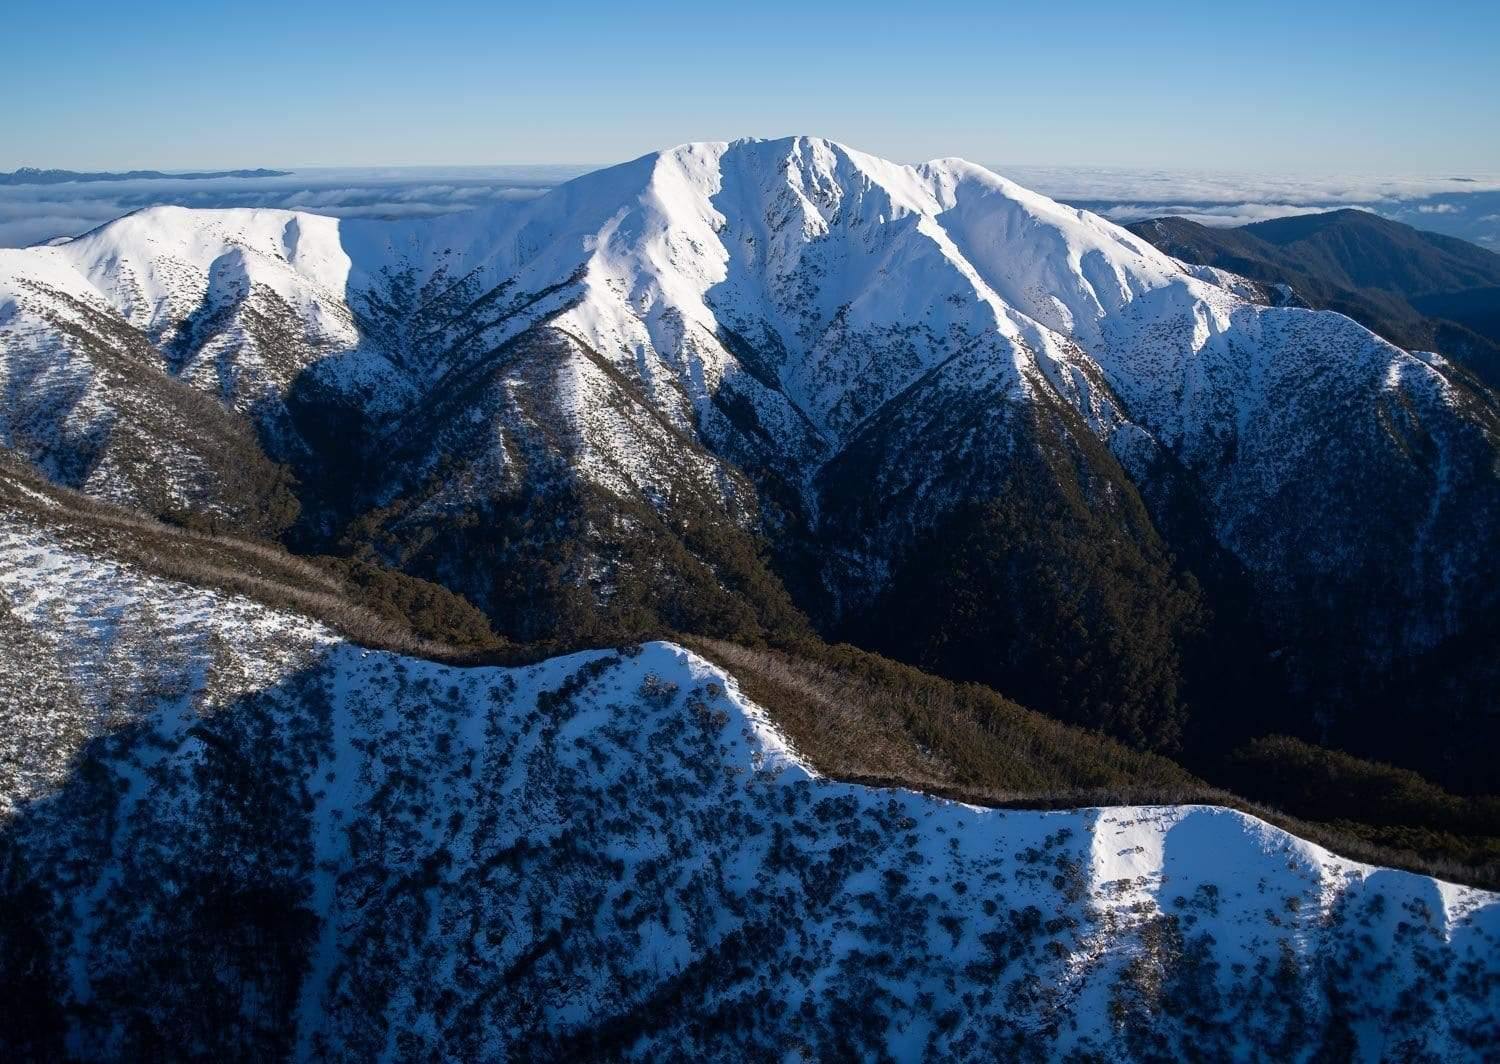 Beautiful giant mountains covered with snow from the top, and dense grass and bushes on the bottom and the ground, Feathertop Awakens - Victorian High Country